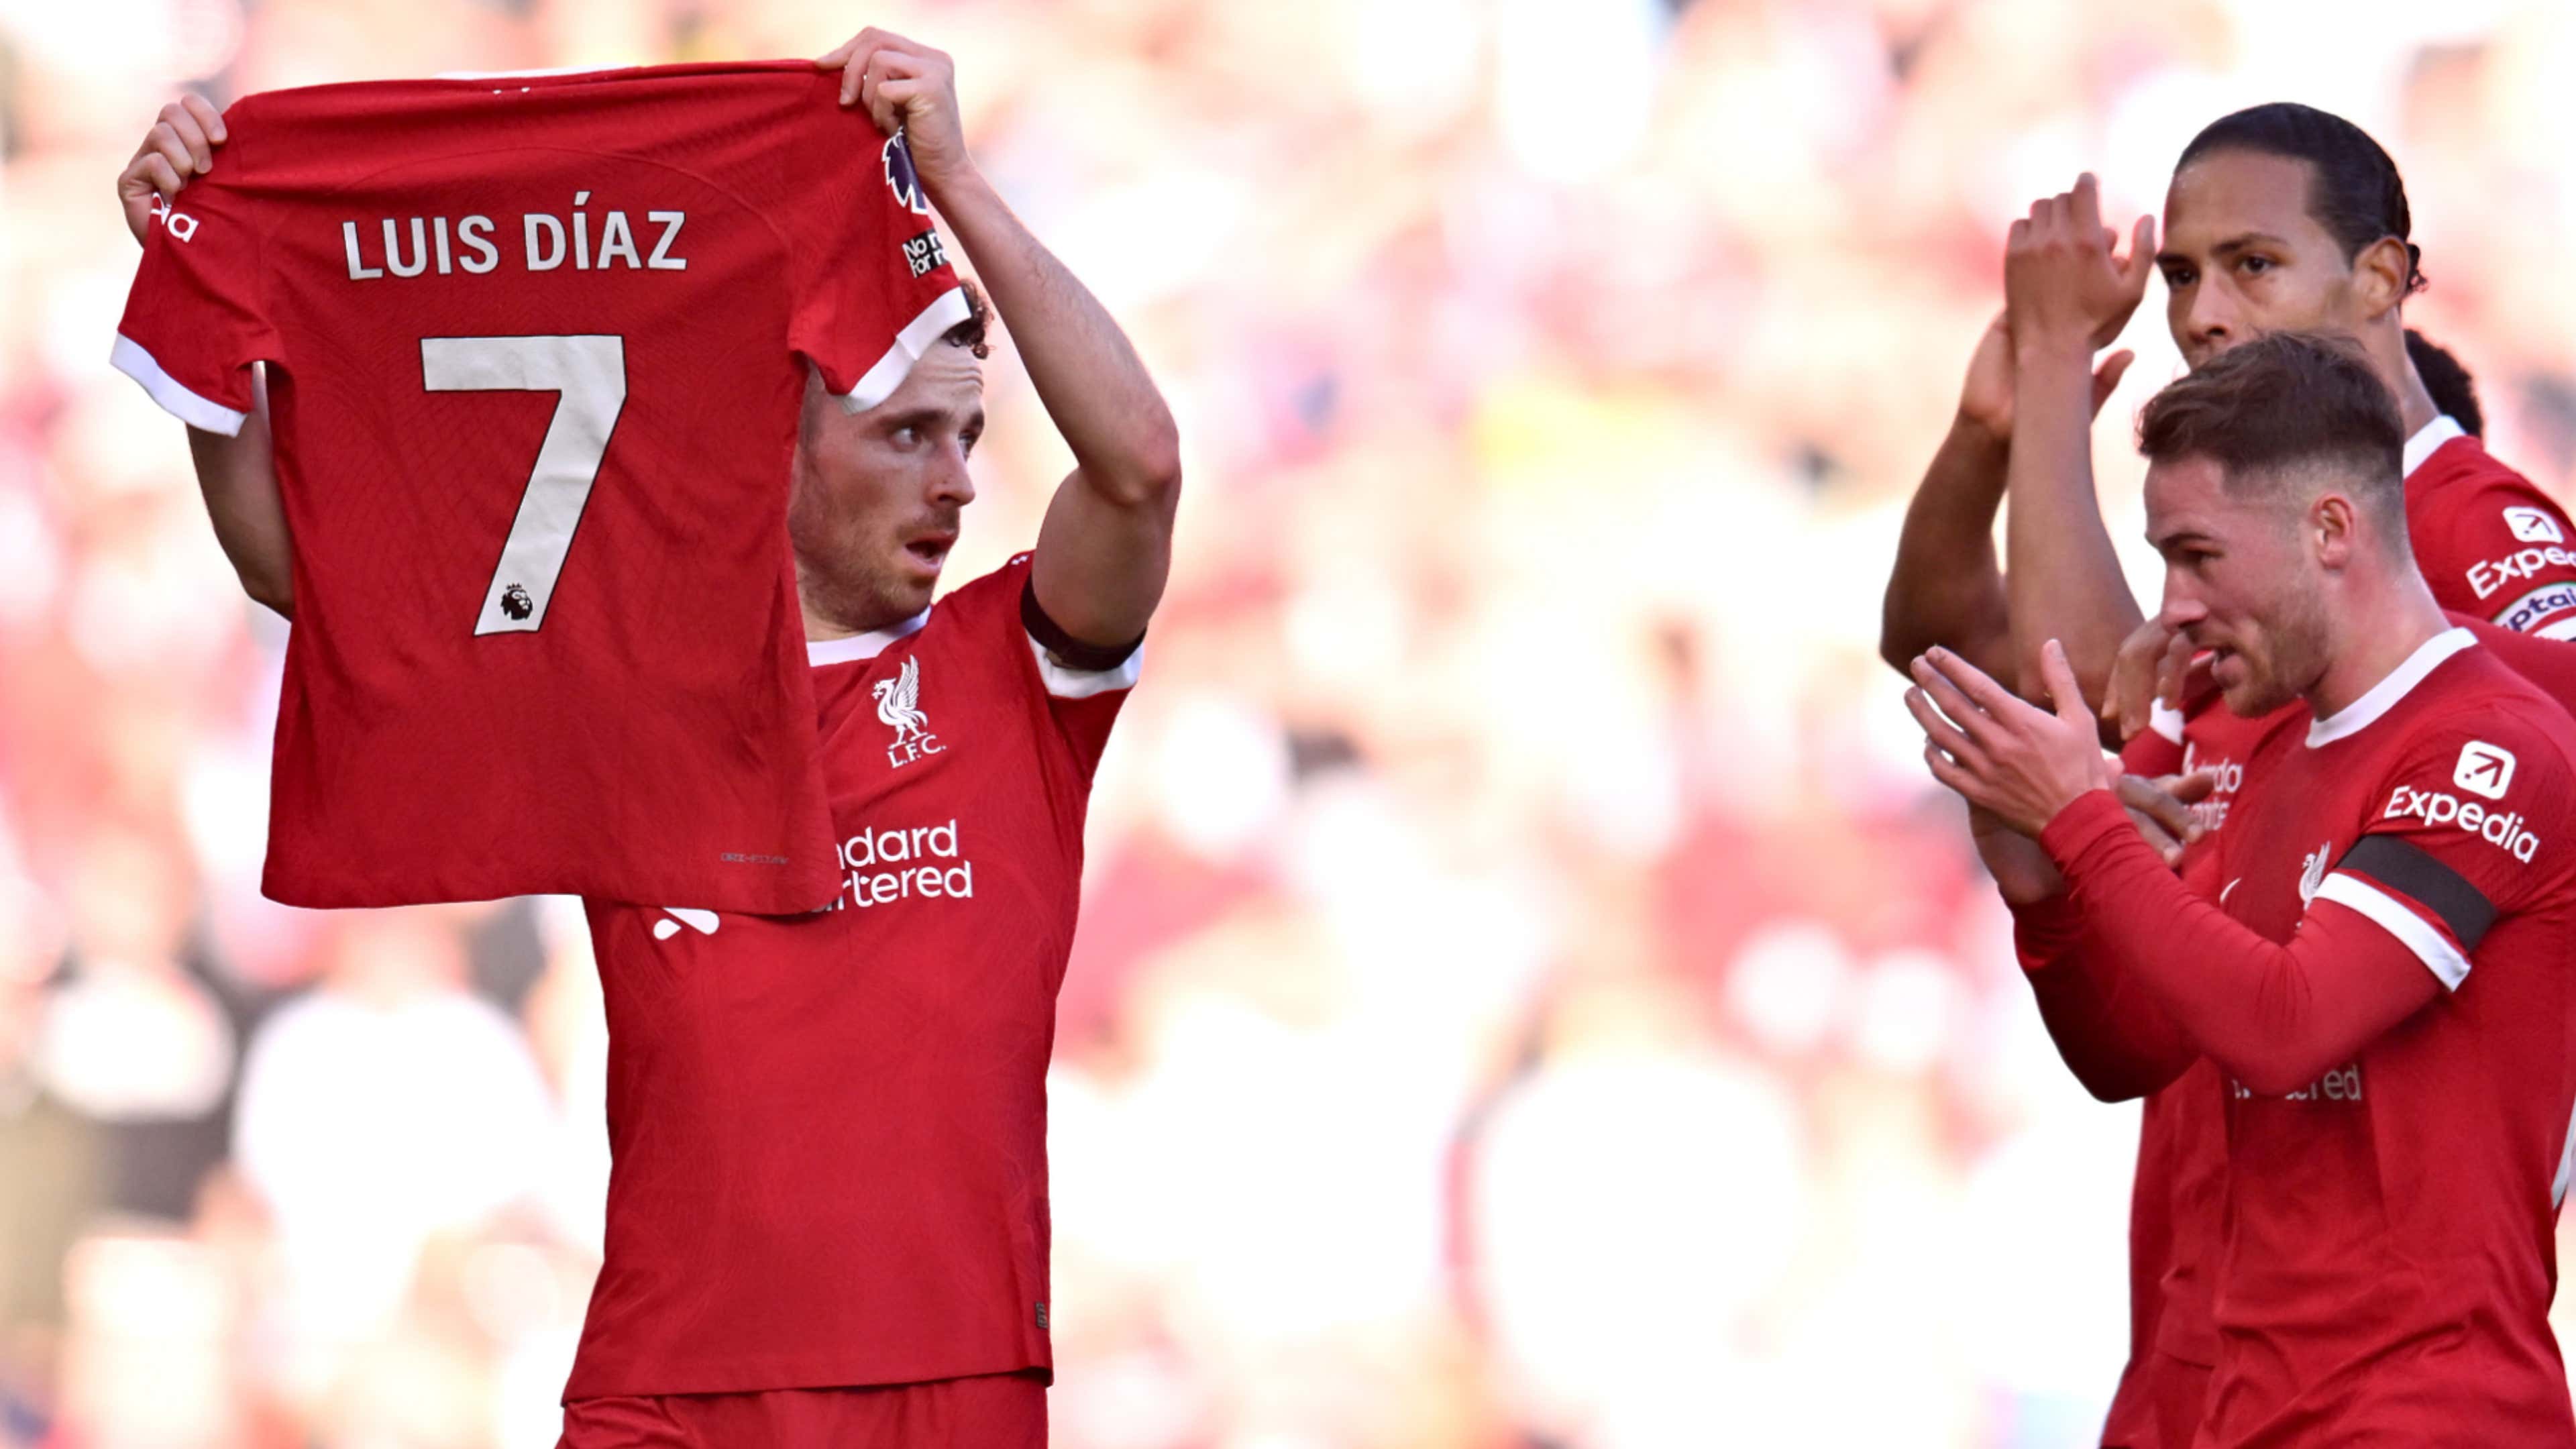 Liverpool star Diogo Jota talks about Luis Diaz and celebrating with his shirt in win against Nottingham.